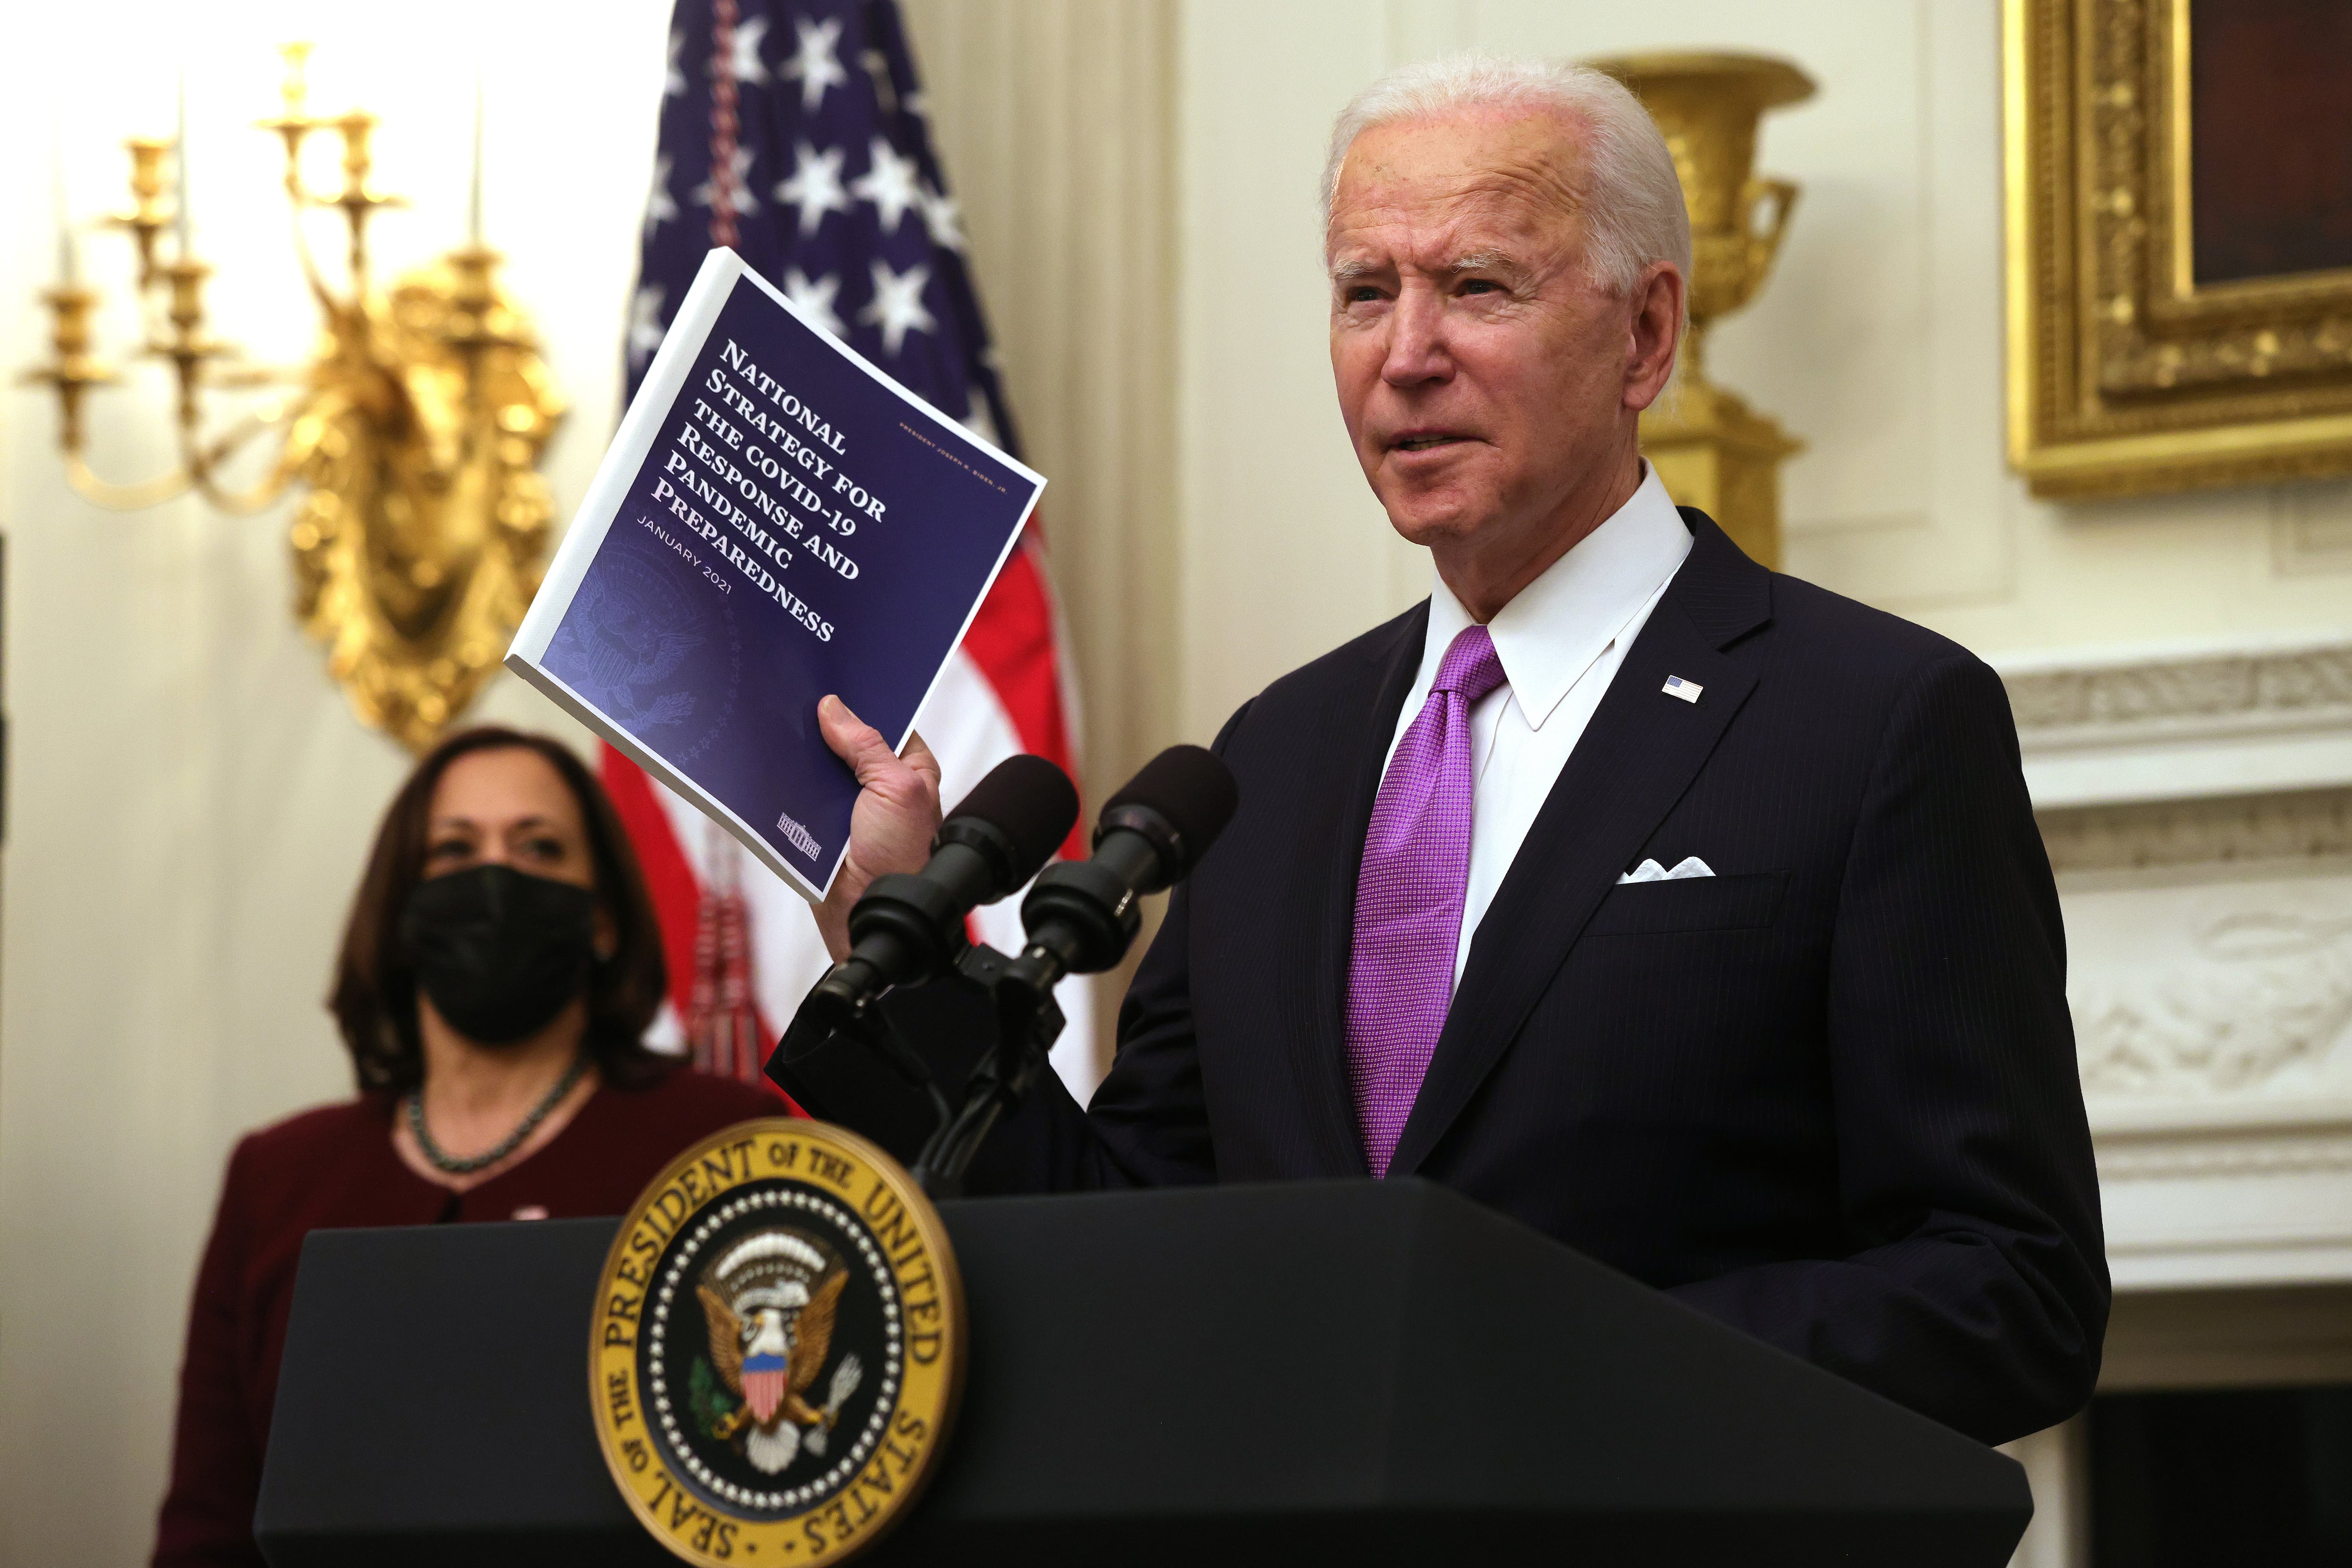 President Biden unveiled his national strategy for reopening schools on January 21, 2021.